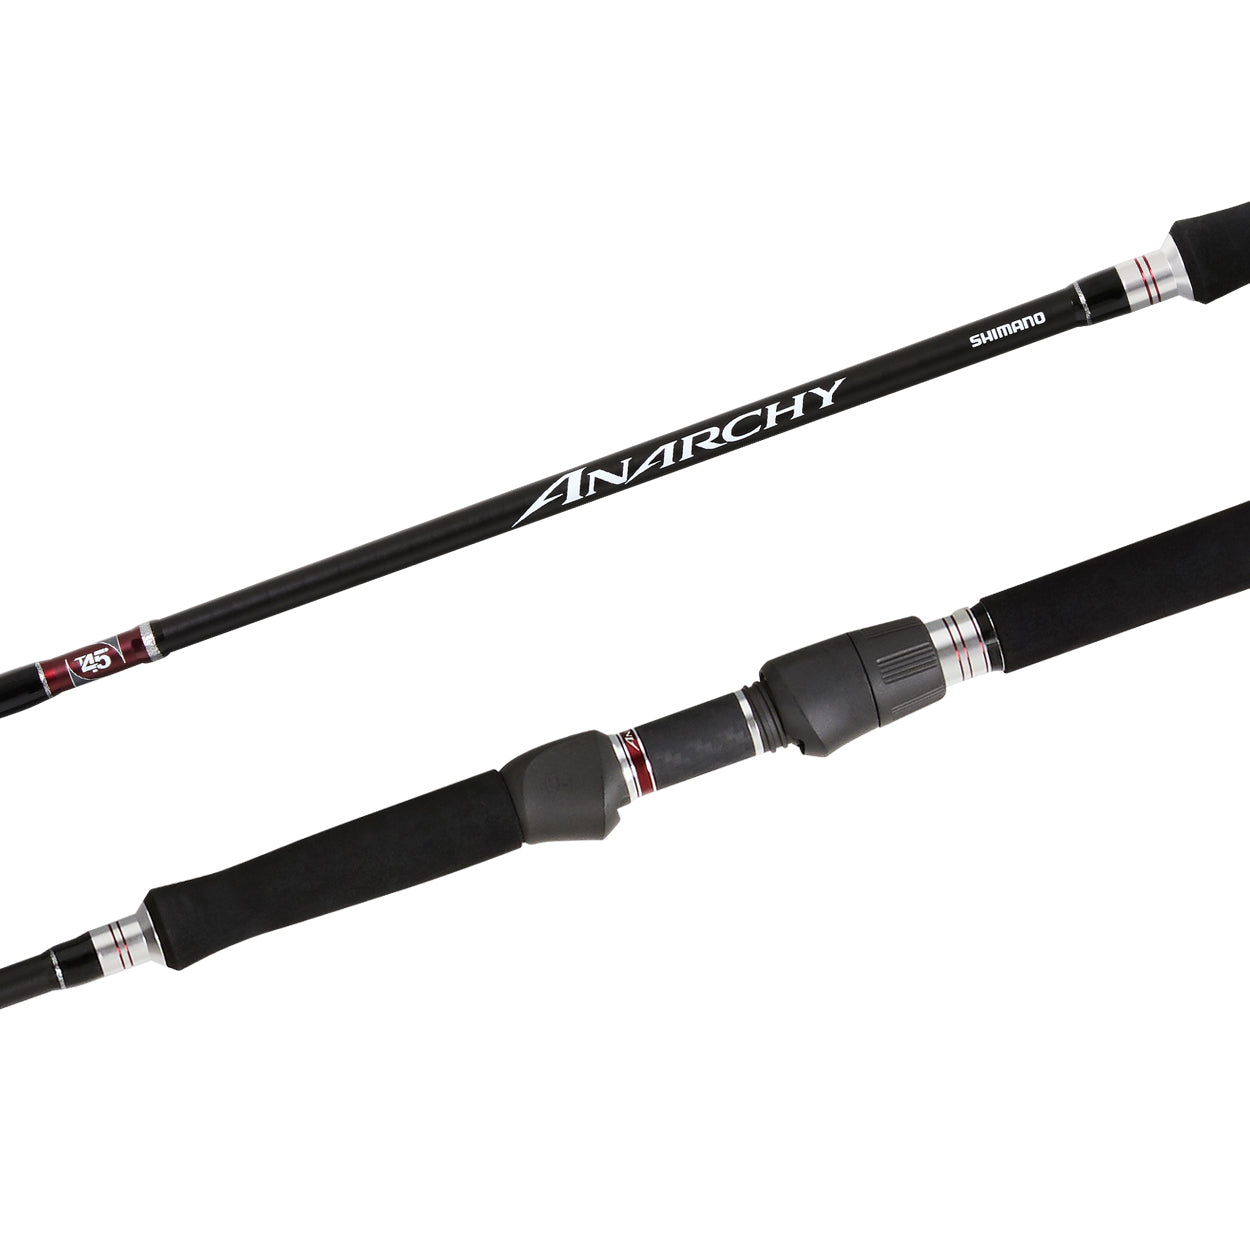 Fishing Rods For Sale - Shop for Spin, Overhead, Baitcast & more Page 4